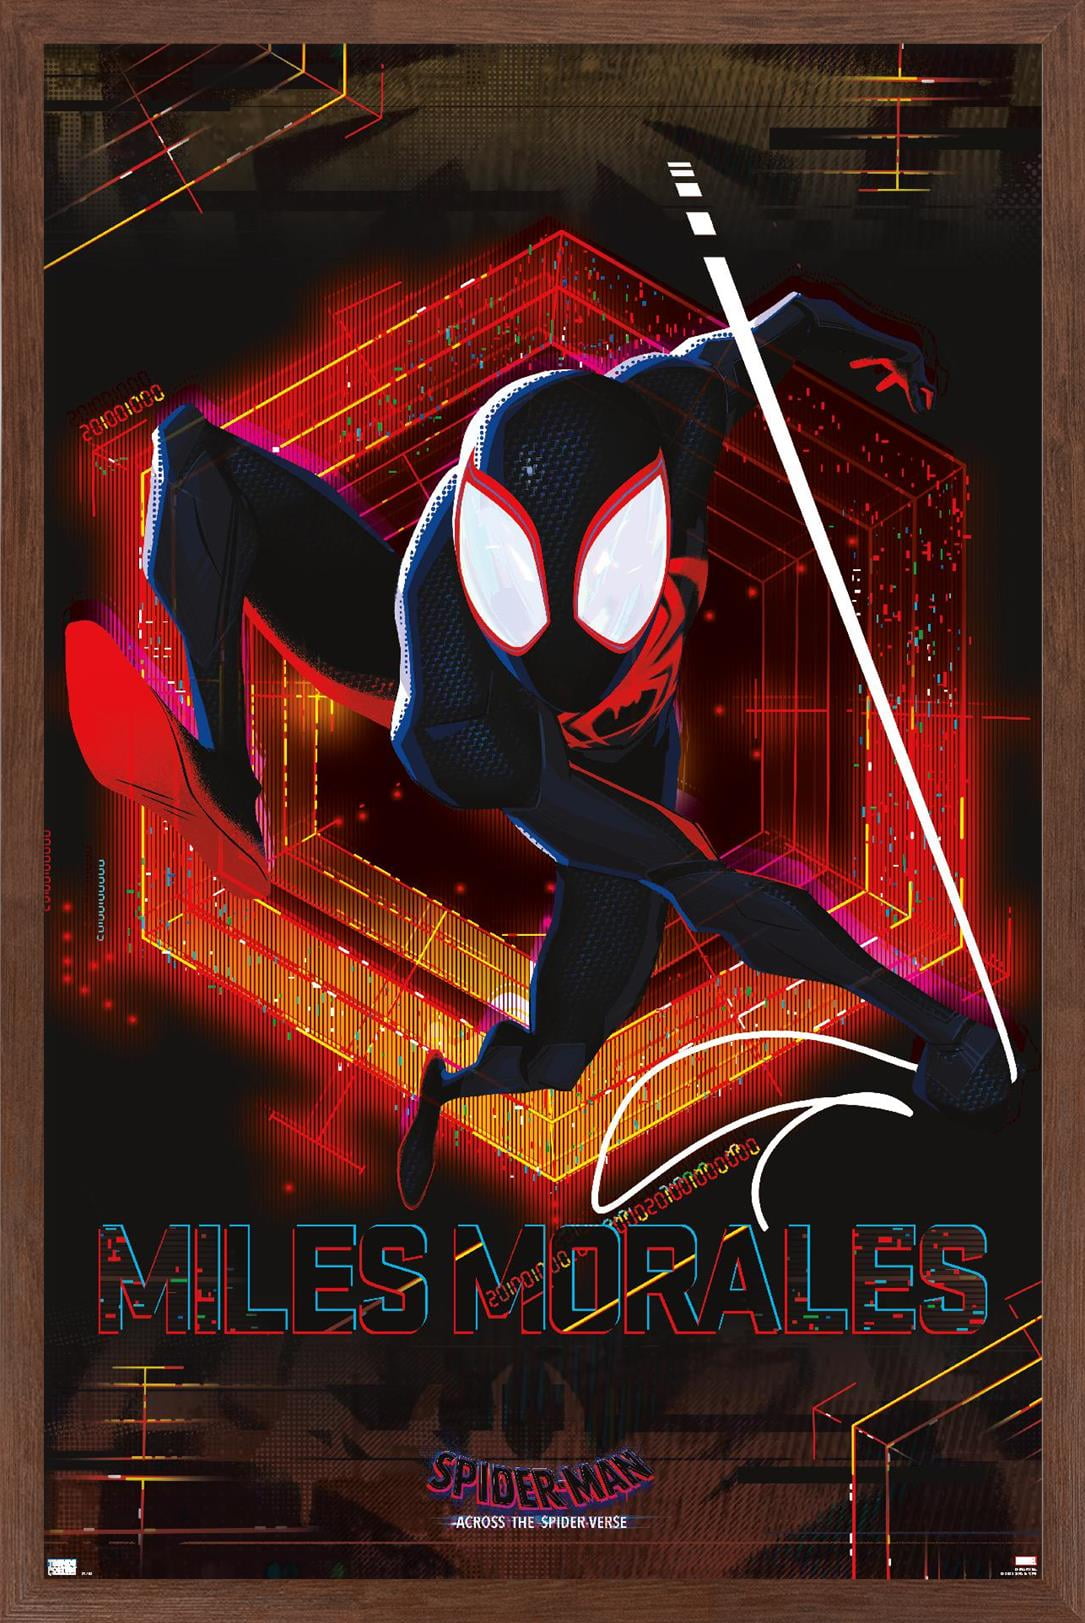 Spider-Man: Across the Spider-verse (Poster) by Axellmejiart on